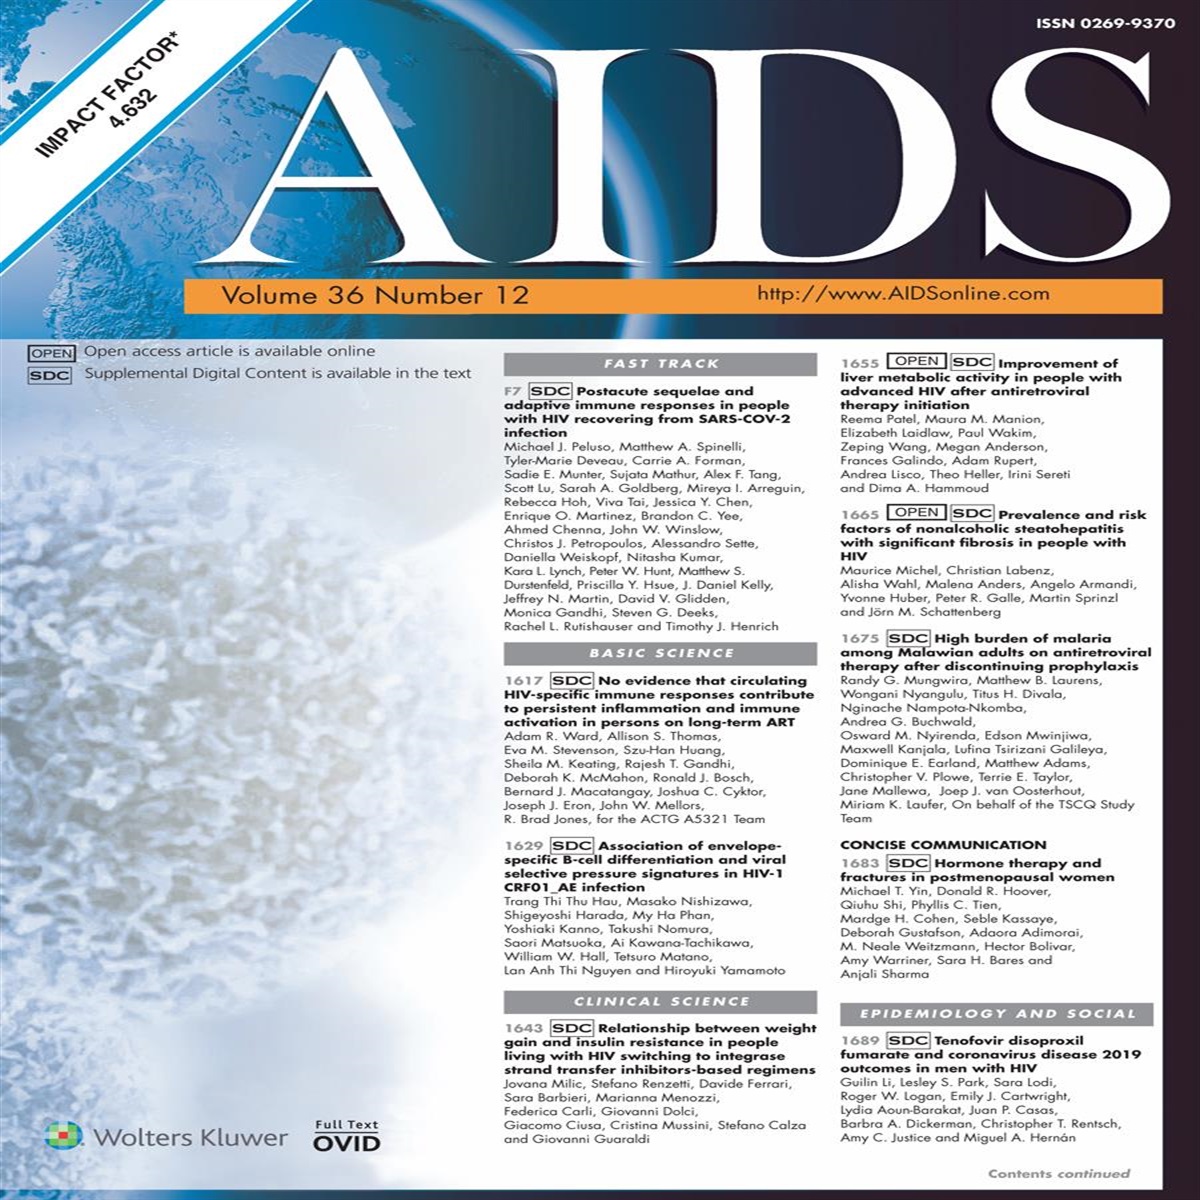 Hormone therapy in postmenopausal women living with HIV: a view towards prevention of multiple metabolic conditions and improvement of quality of life